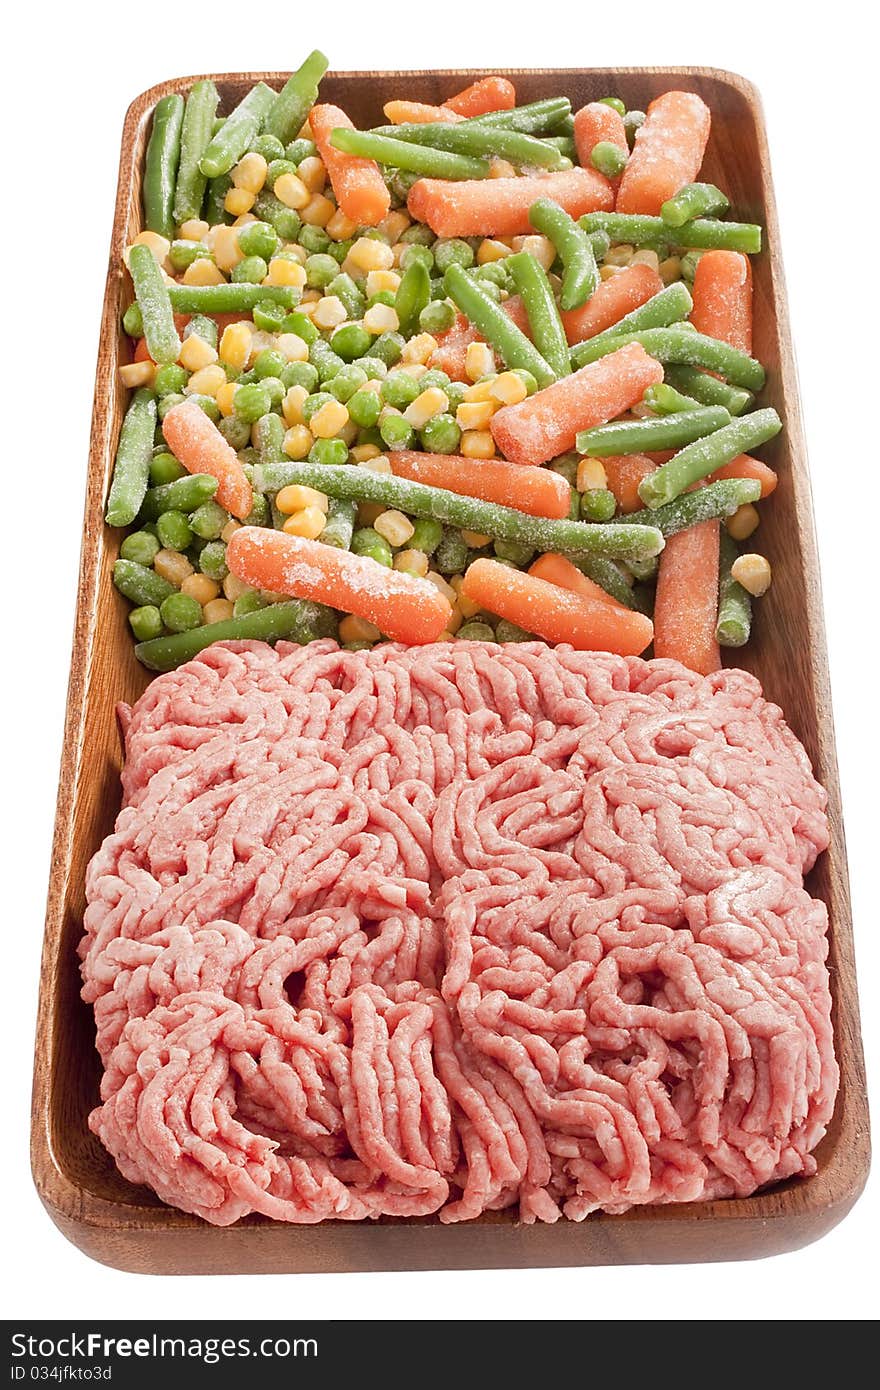 Freshly ground meat for cooking meat delicacies. Freshly ground meat for cooking meat delicacies.